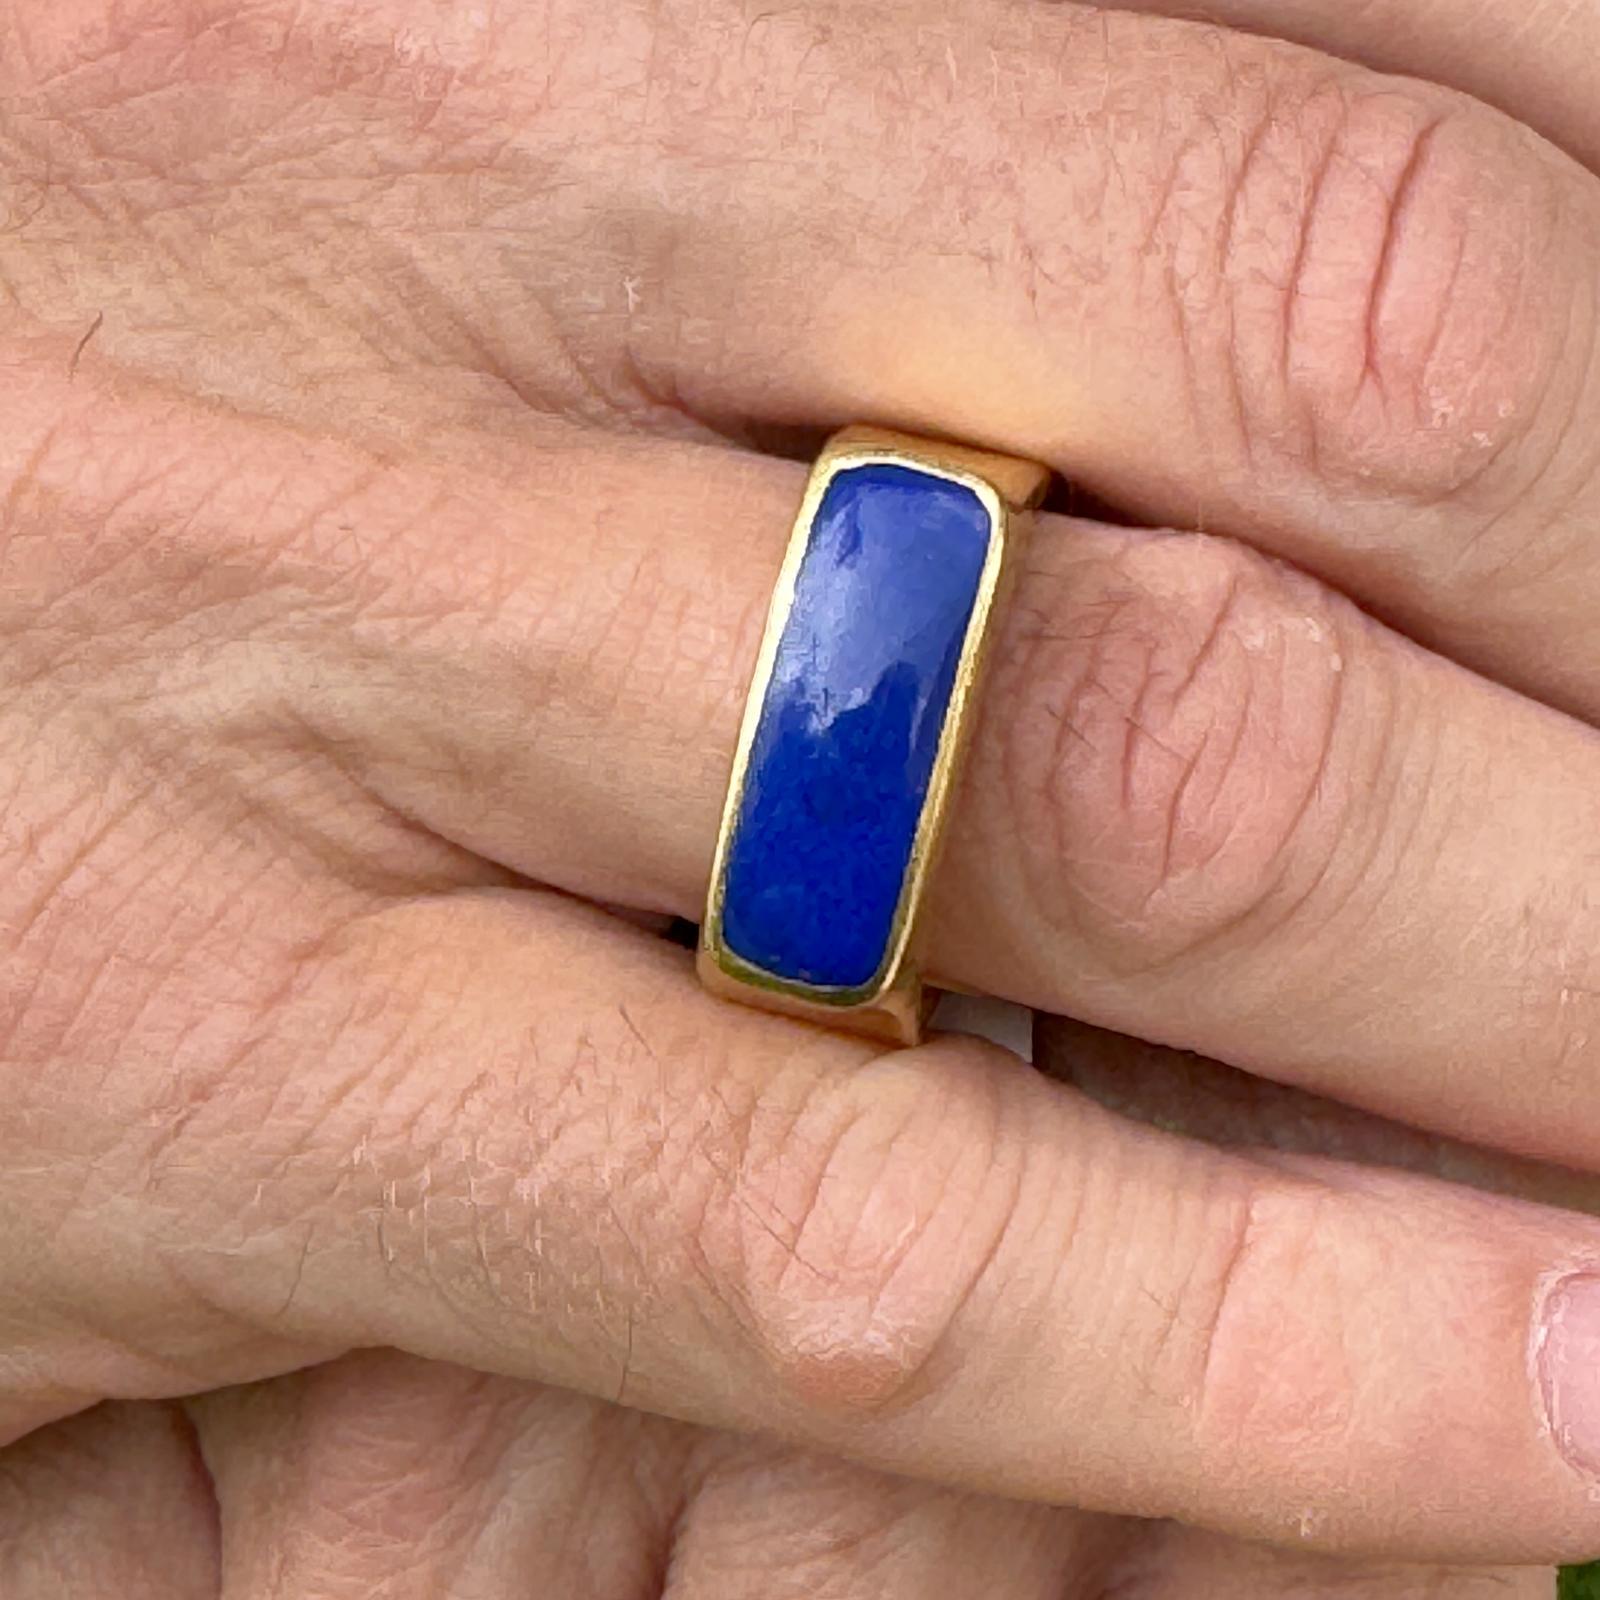 Gents lapis lazuli modern band ring handcrafted in solid 22 karat yellow gold. The ring features a cabochon lapis lazuli gemstone bezel set in a high polish artisan mounting. The ring is currently size 12 (can be sized) and measures 10mm in width.